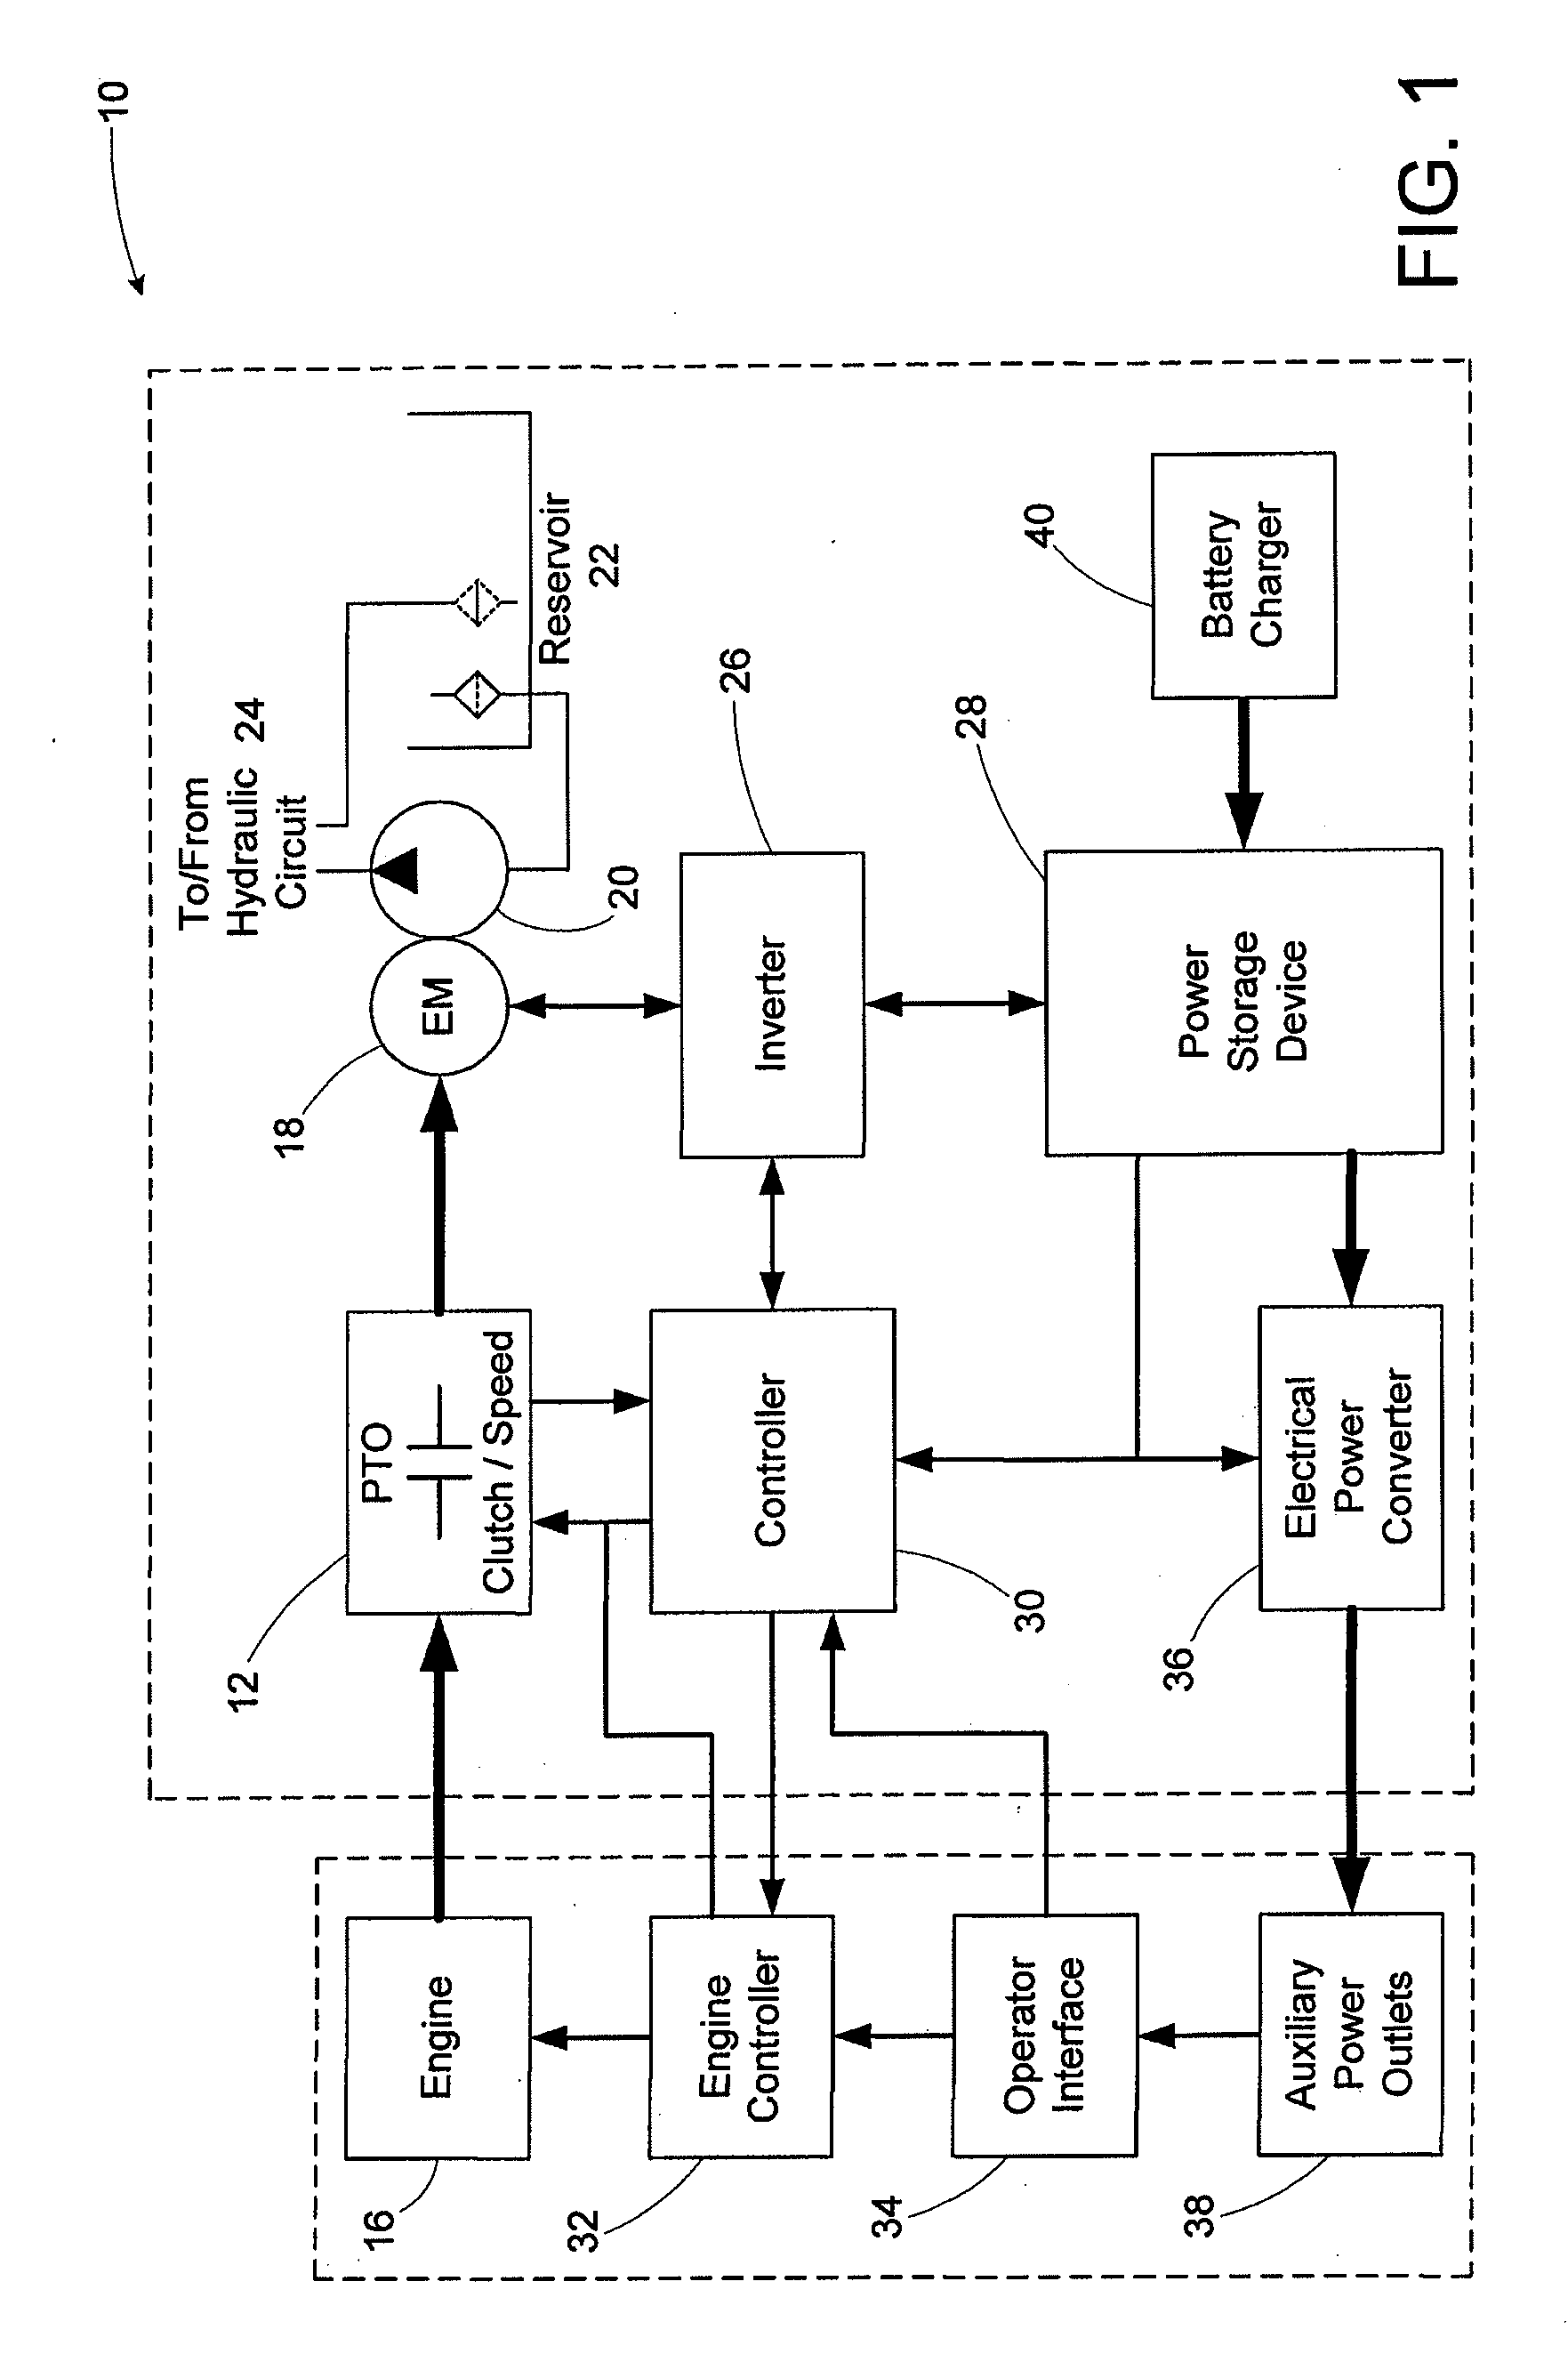 Electrical interrupt system and method for use in a hybrid system